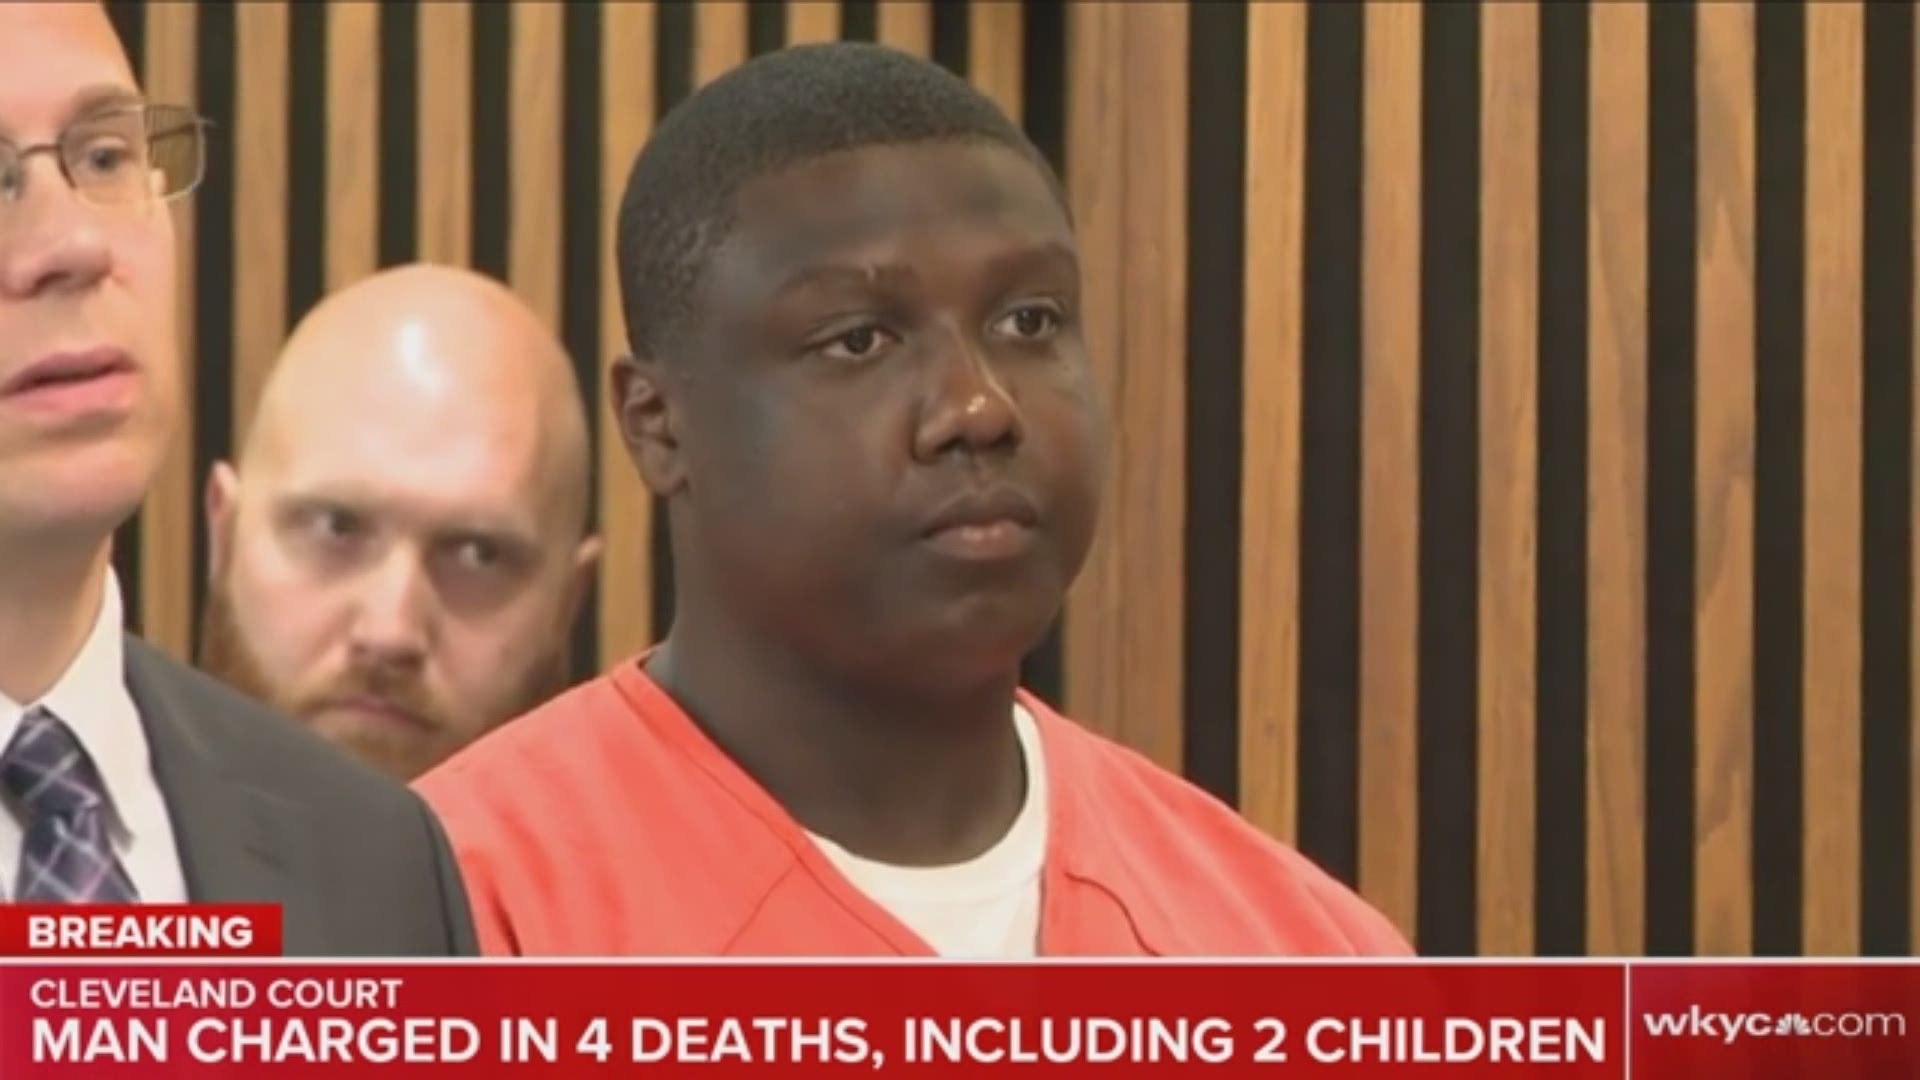 July 12, 2019: The man accused in the deaths of four people – including two children – is being held on $5 million bond. Armond Johnson, who has been charged with aggravated murder, made his first court appearance in the case Friday after his arrest earlier this week. A preliminary hearing has been set for July 25. Police say Johnson is the father of one of the children who died, 6-year-old Armond Johnson Jr.